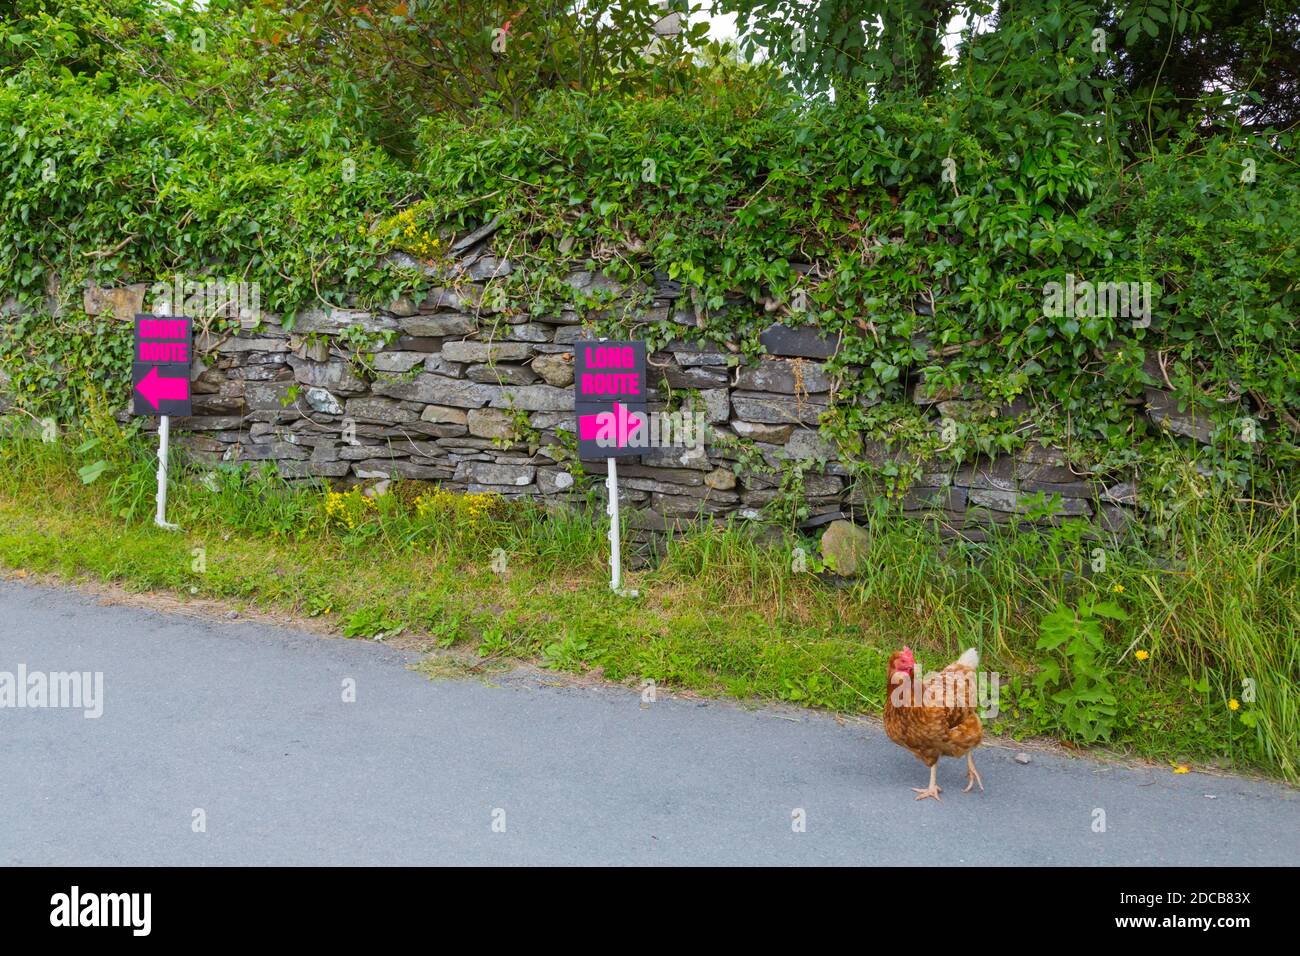 A chicken deciding which way to go Stock Photo